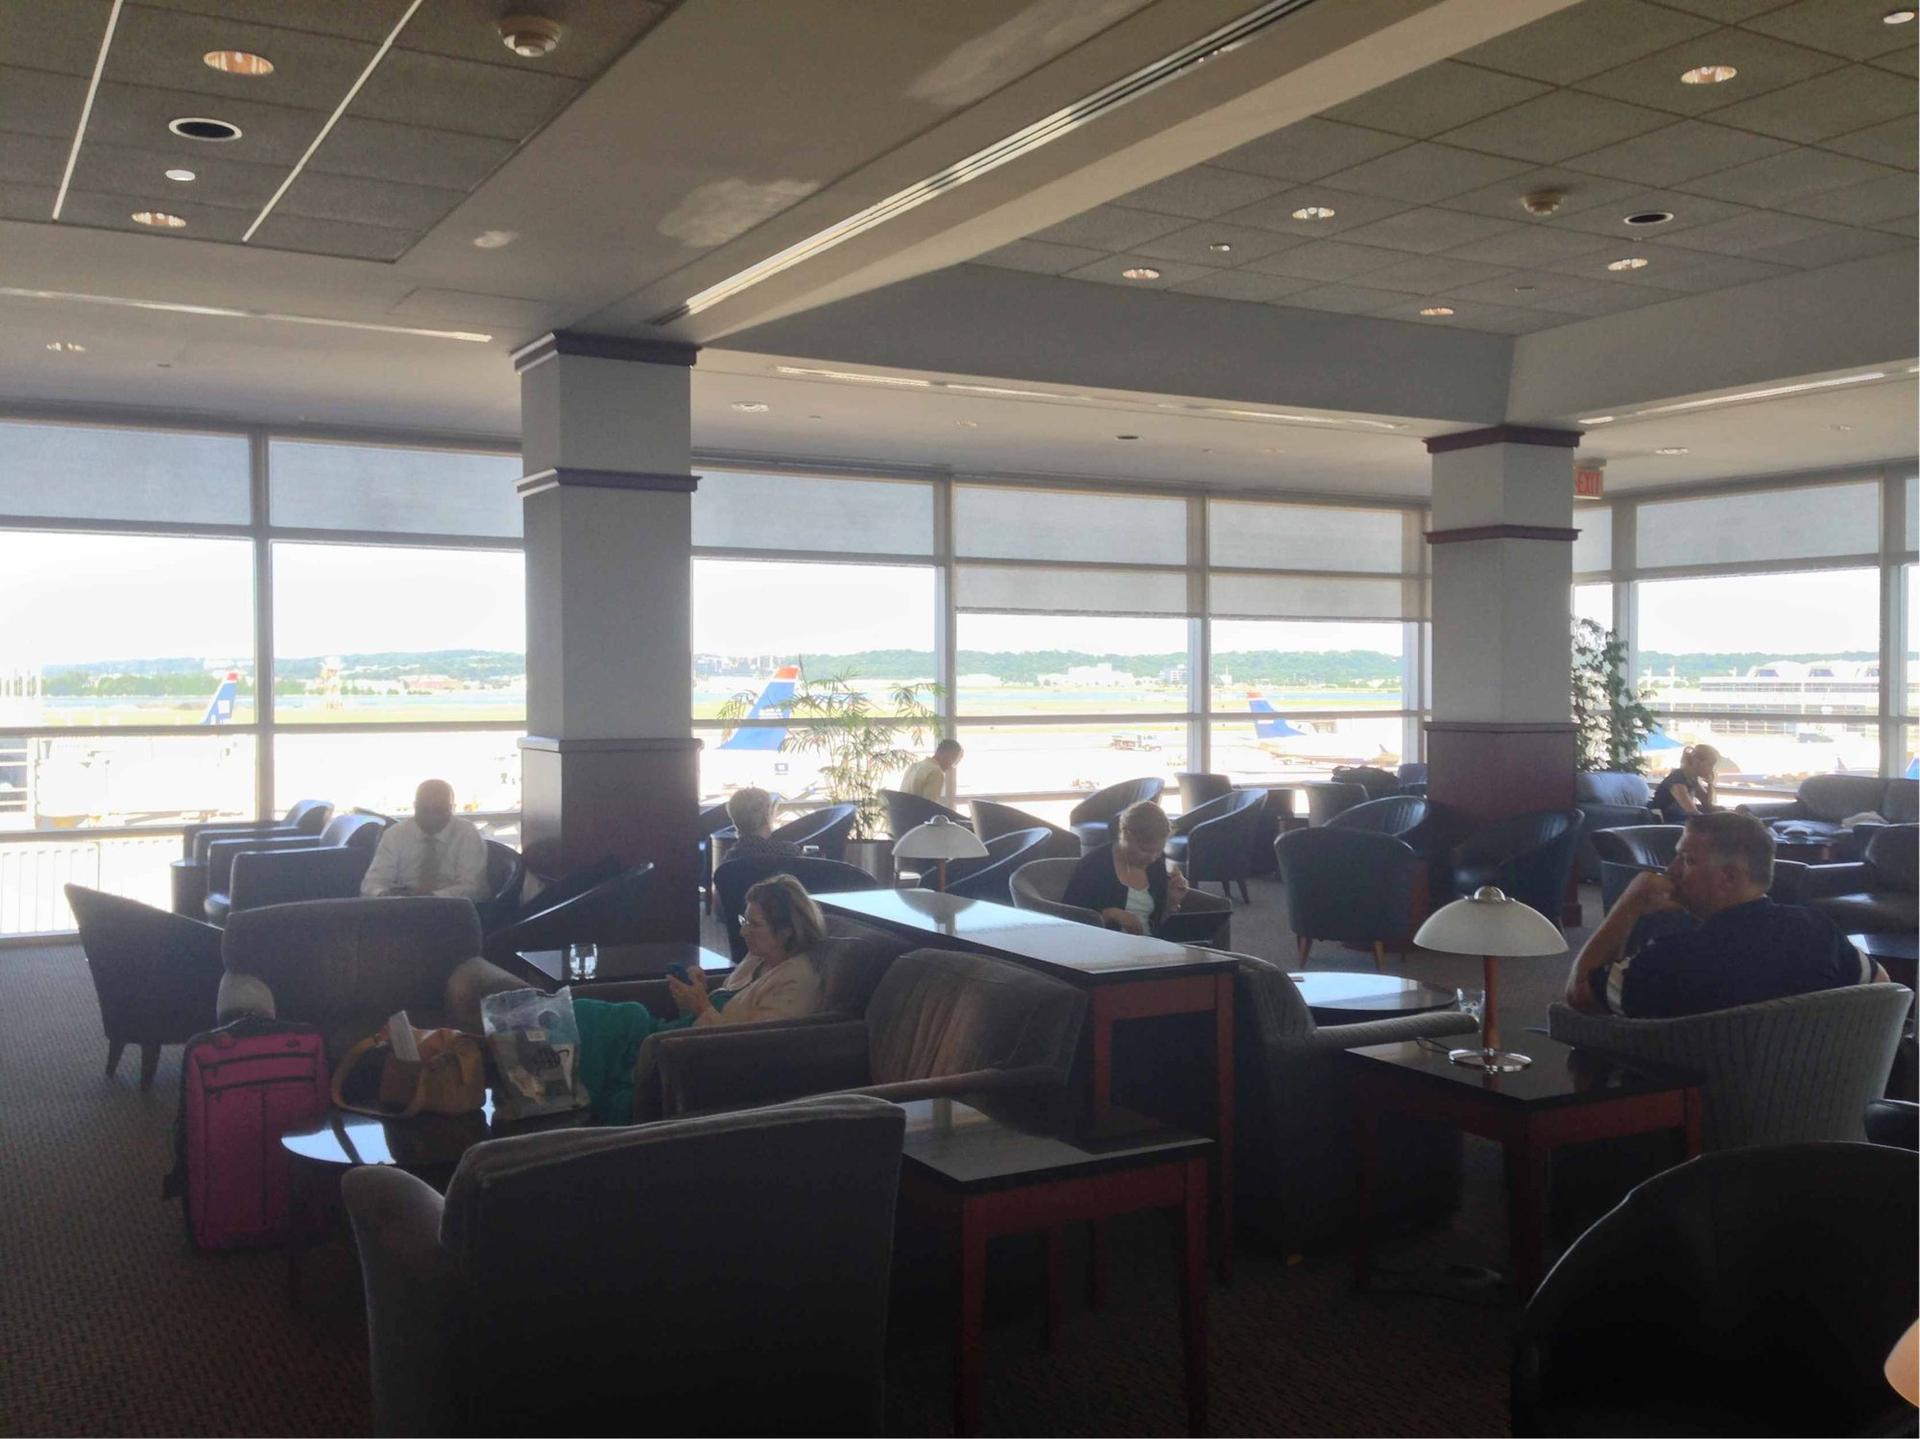 American Airlines Admirals Club image 13 of 19